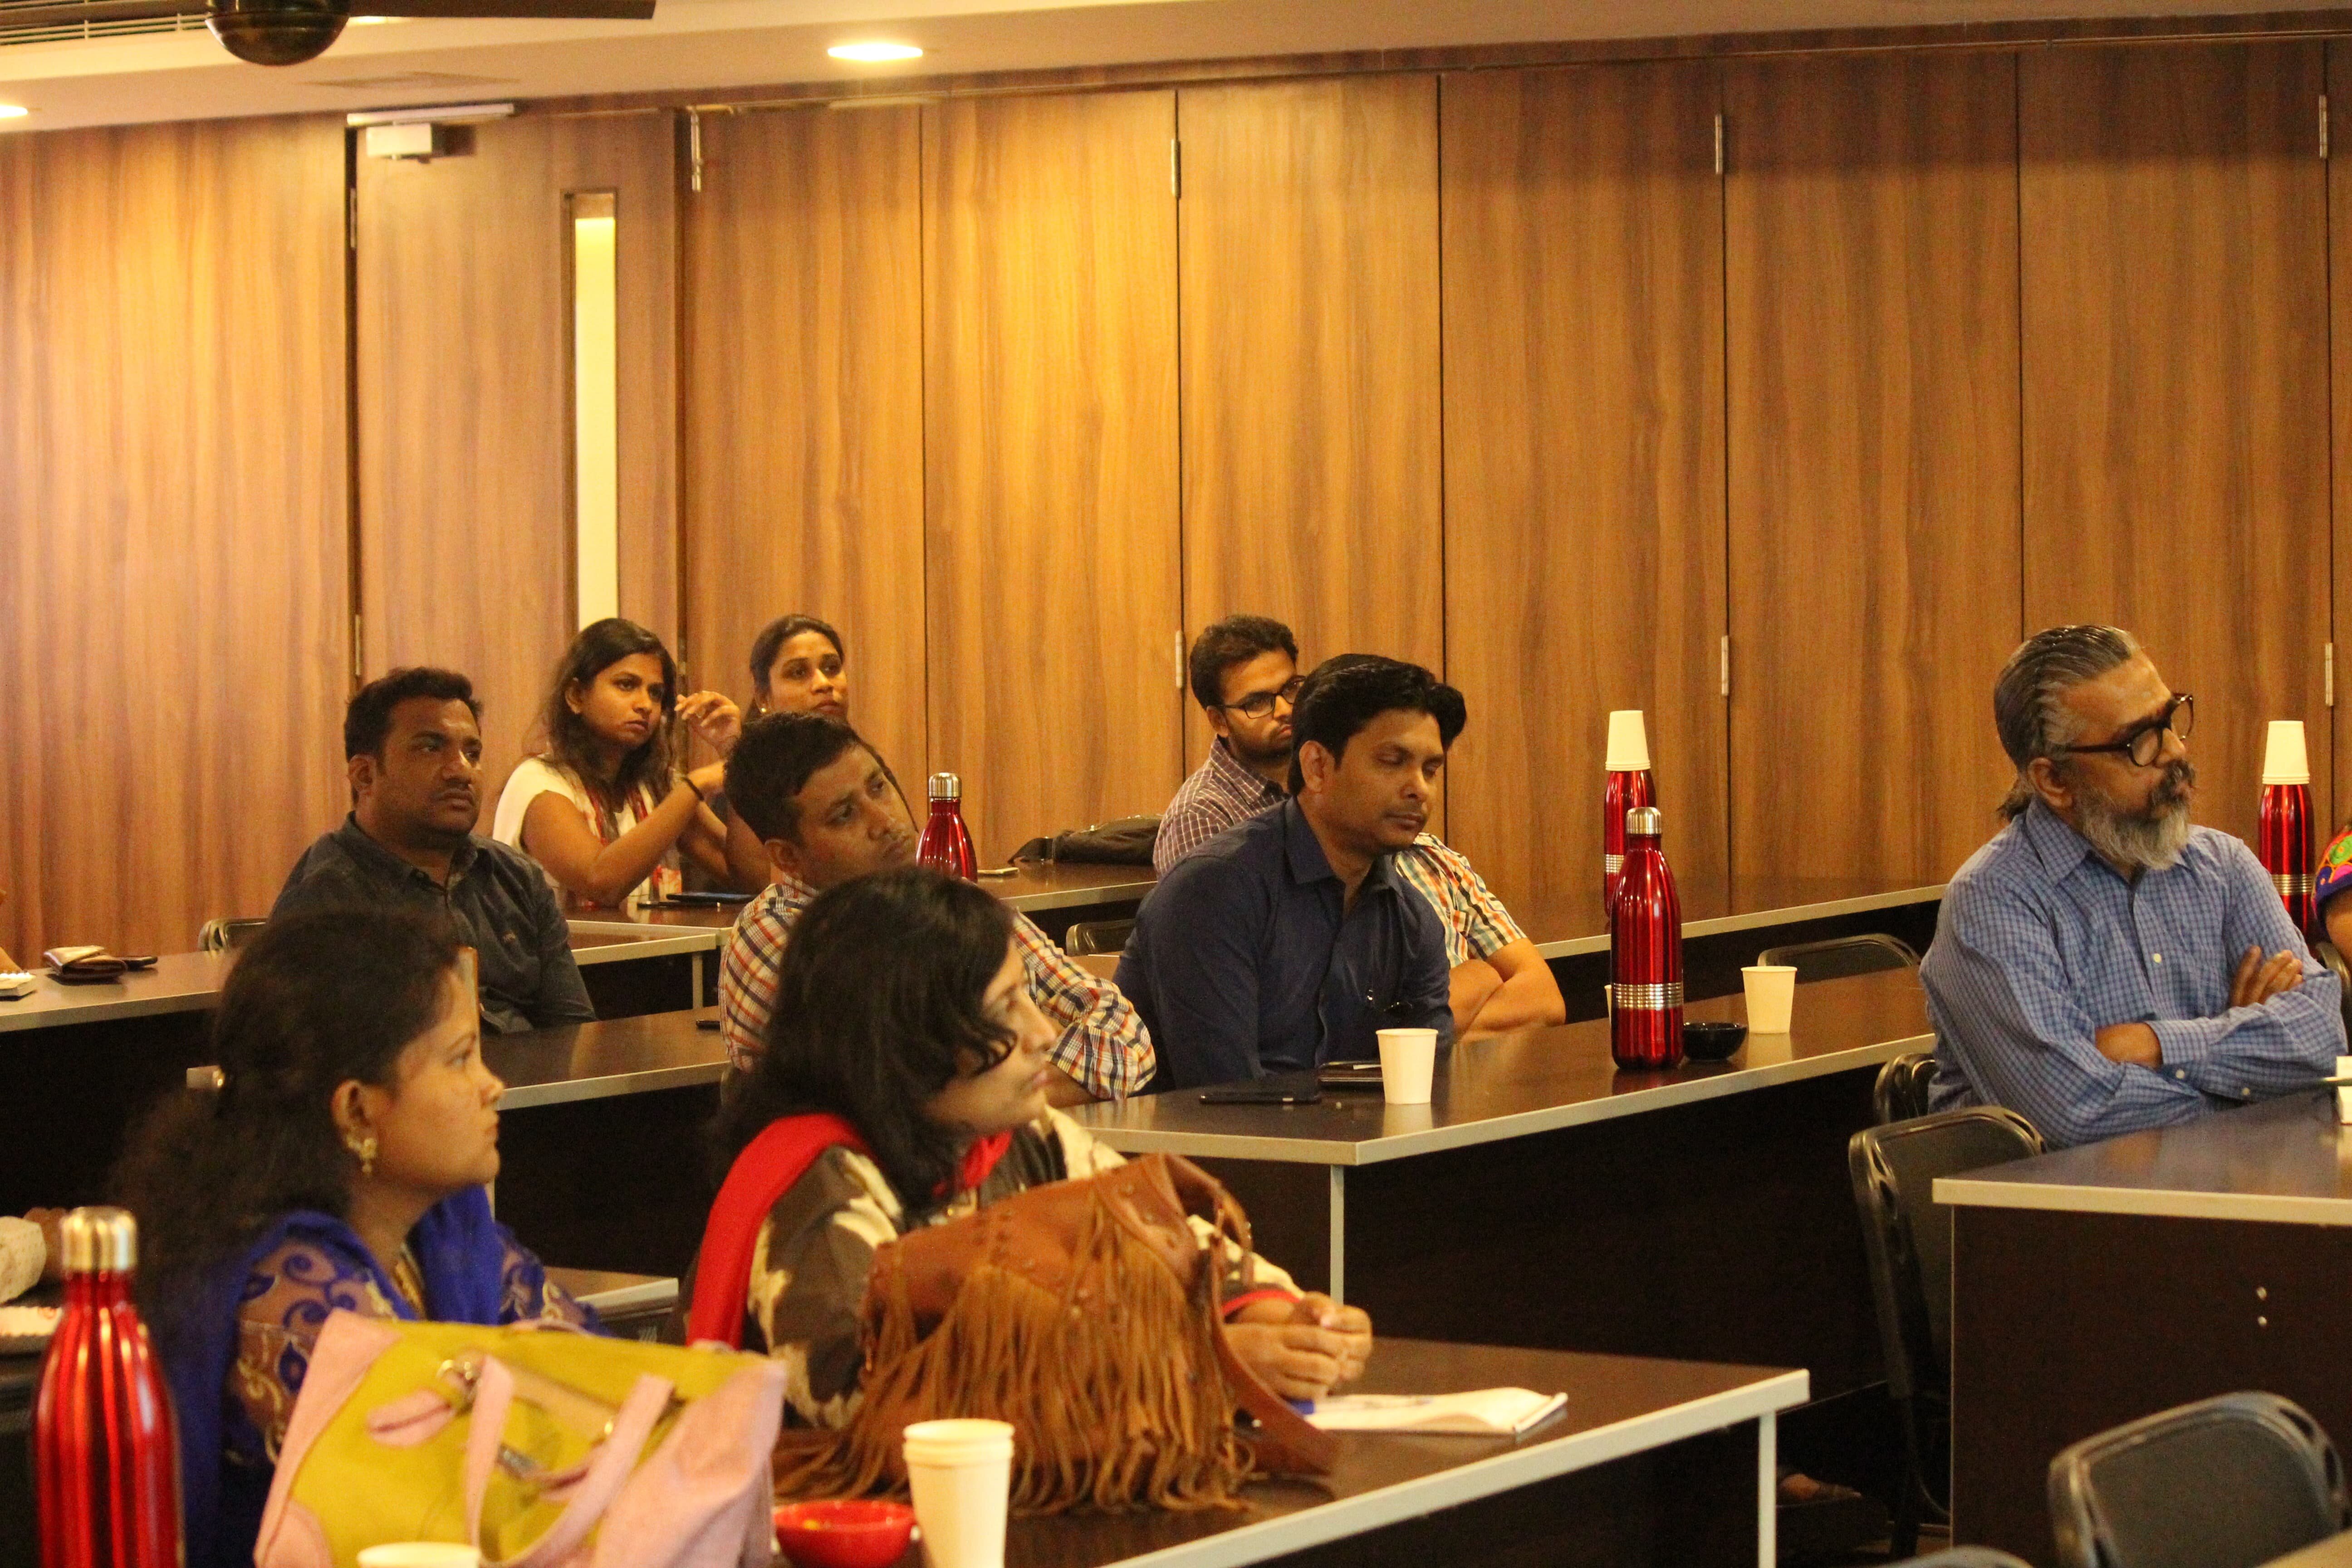 Digital Marketing Workshop Participants conducted by Branding by Pixels